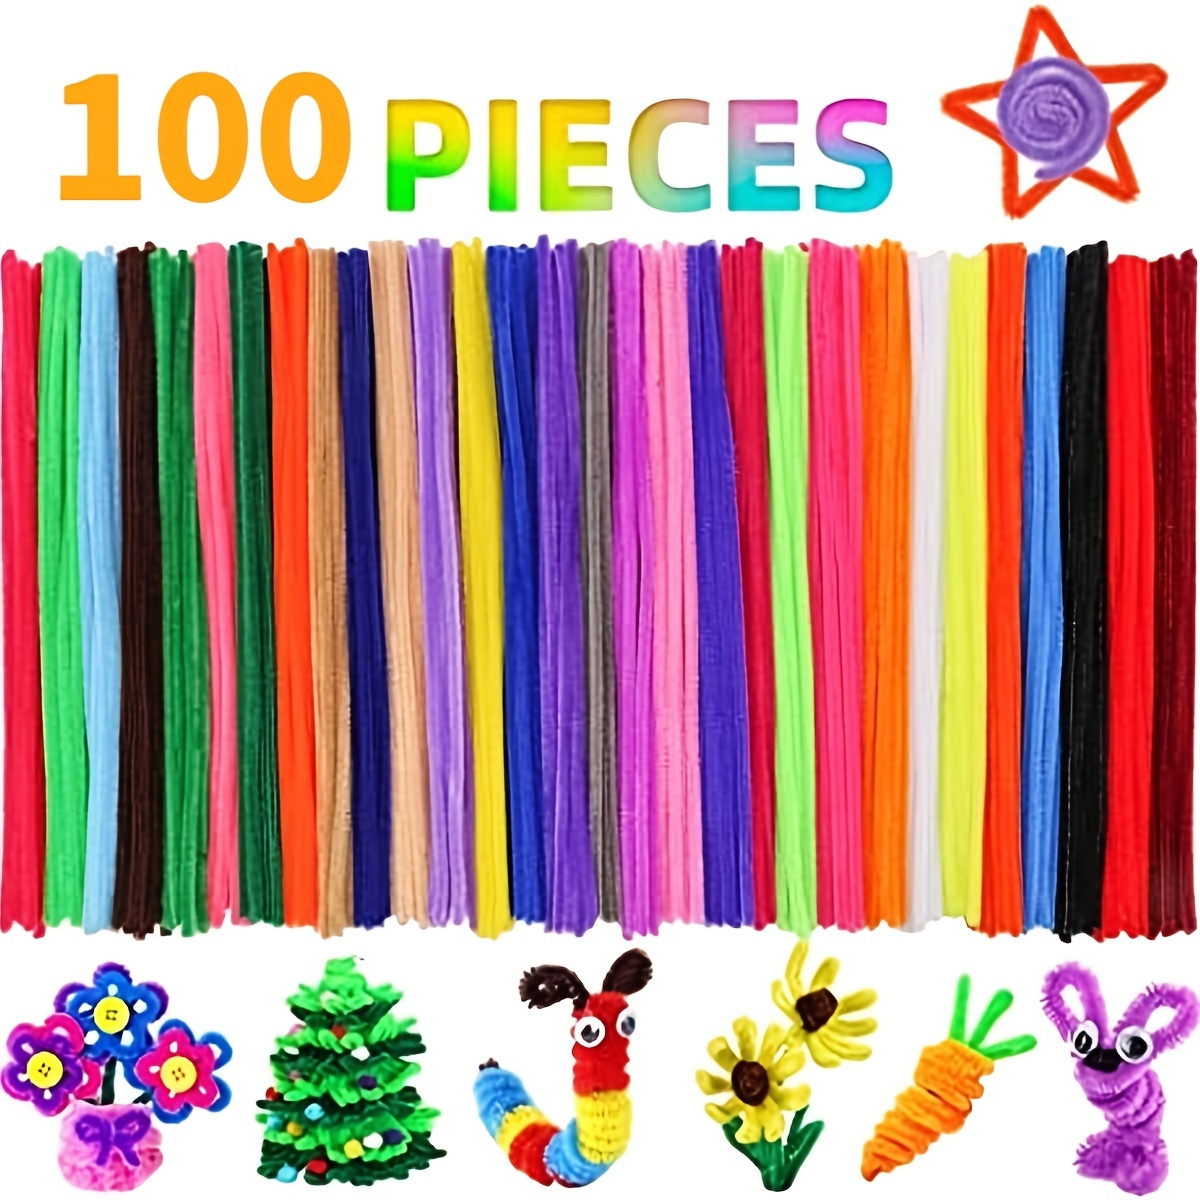 100 Pieces 7mm x 12 Inch Pipe Cleaners, Thick Fuzzy Black Chenille Stems  for Craft Supplies Kids DIY Art Decorations